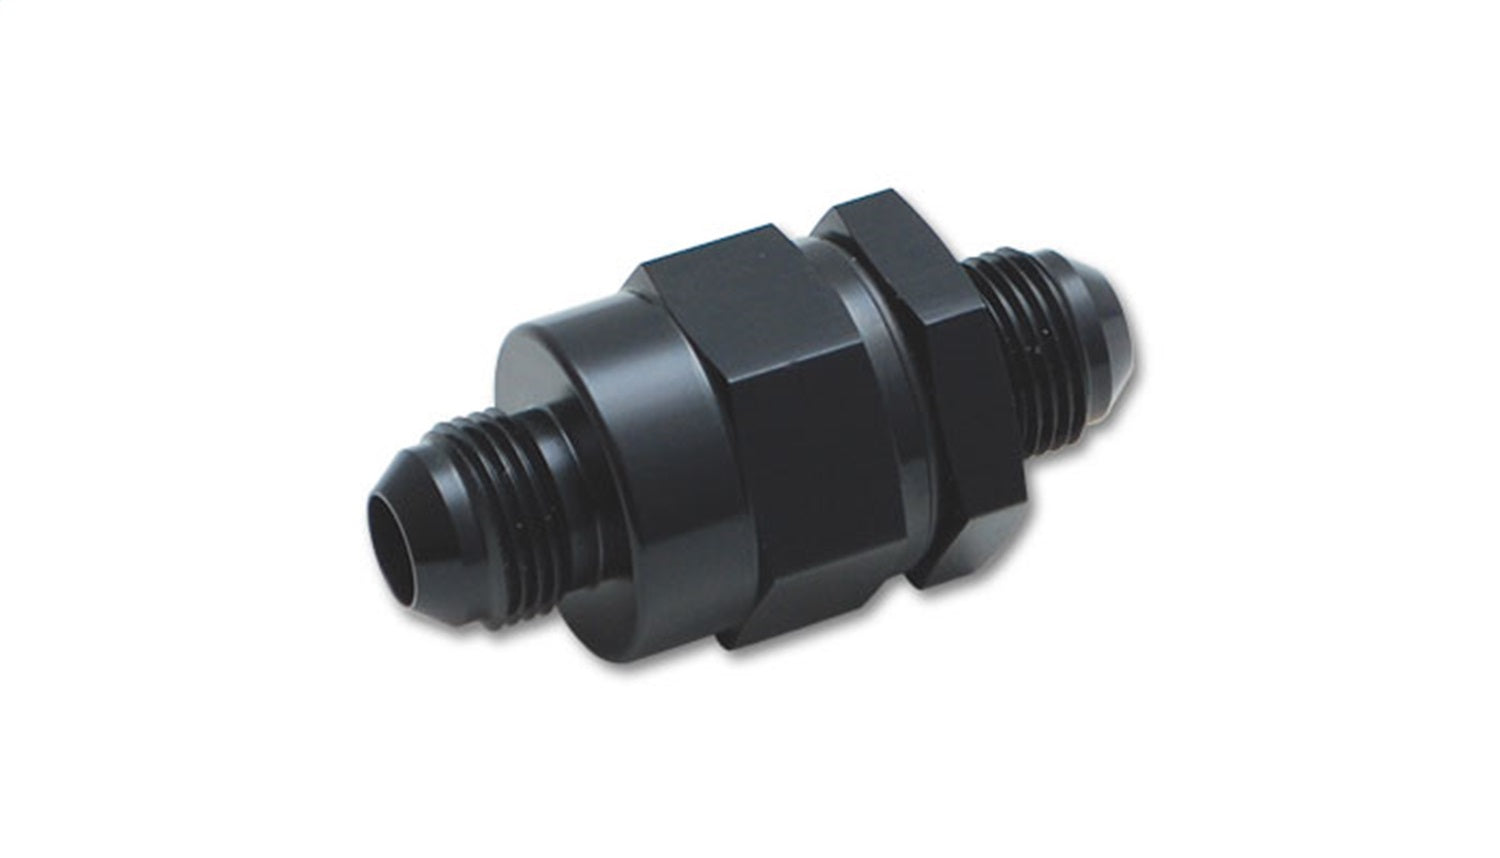 Vibrant Performance One Way Check Valve, Flapper Style, -12AN (Male AN Flare to Male AN Flare)